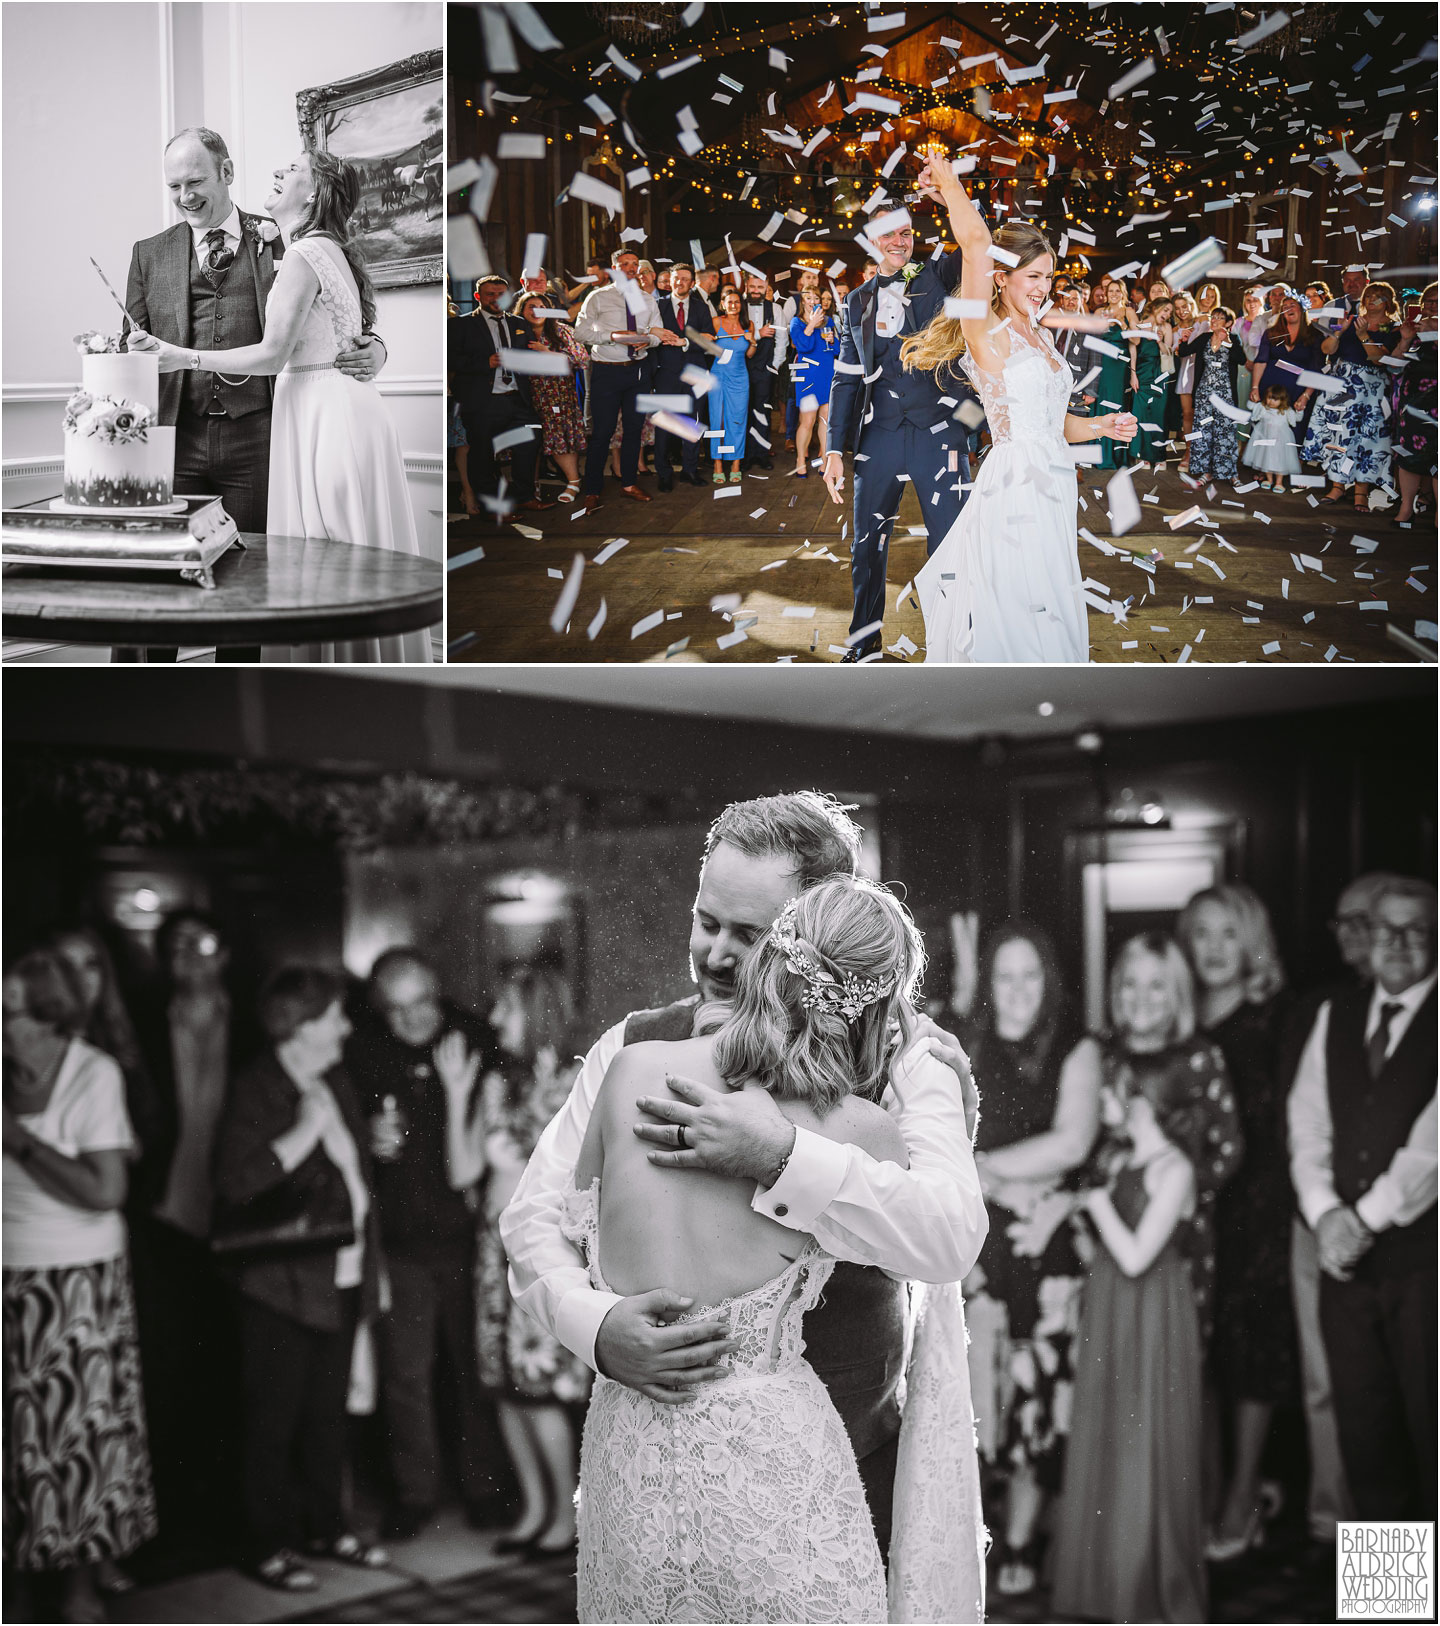 First Dance confetti canon at Wharfedale Grange near Harewood and Harrogate in Yorkshire